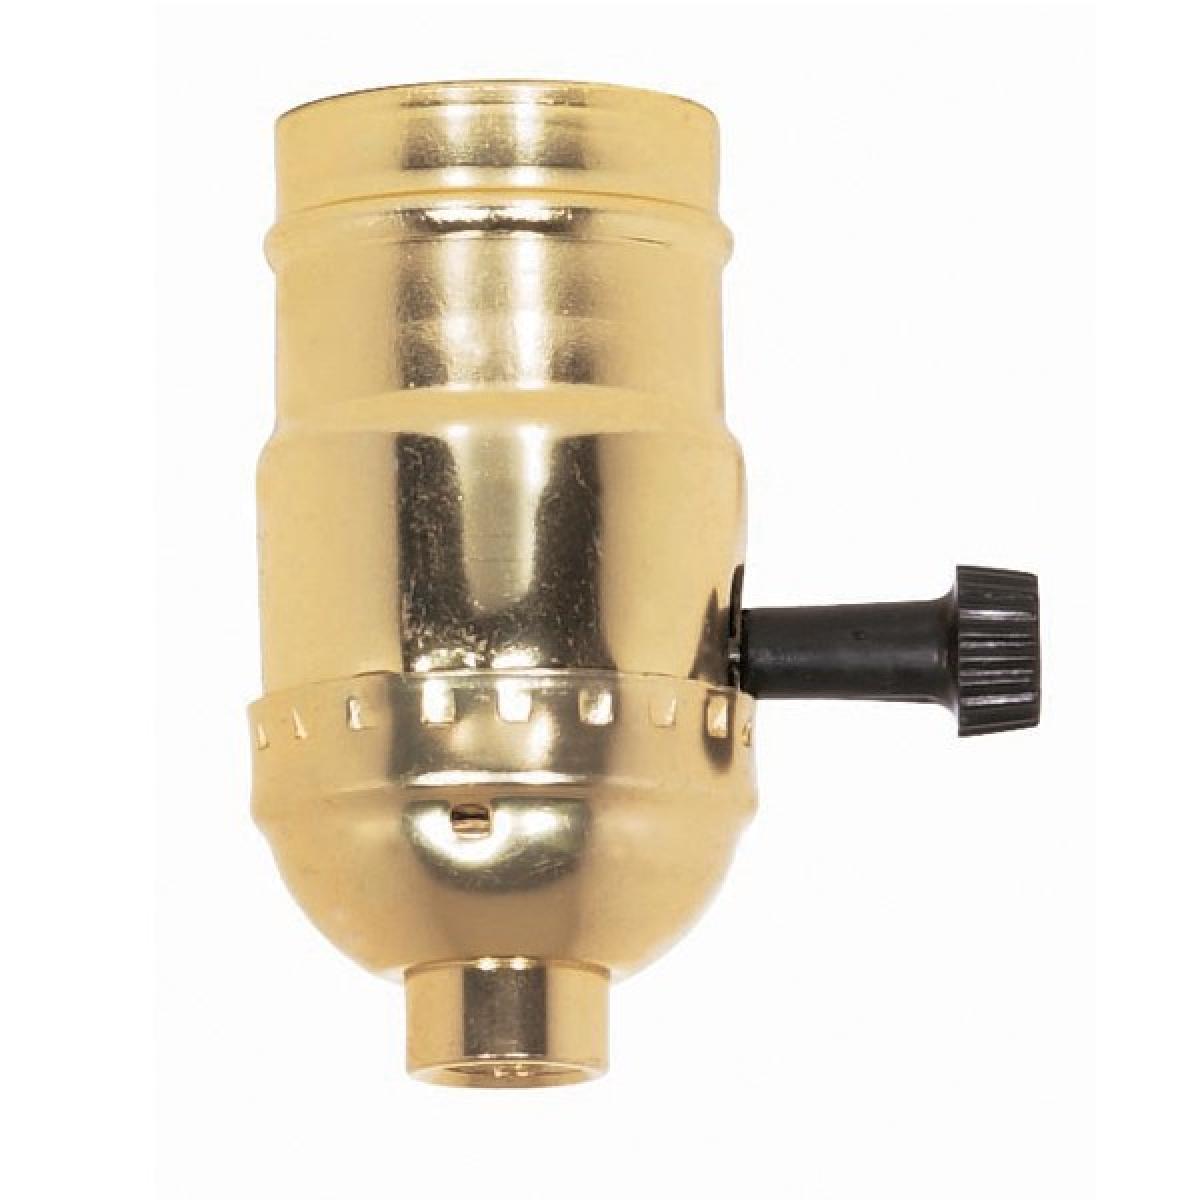 Satco 80-1159 On-Off Turn Knob Socket With Removable Knob 1/8 IPS Aluminum Brite Gilt Finish 250W 250V Push-In Terminal